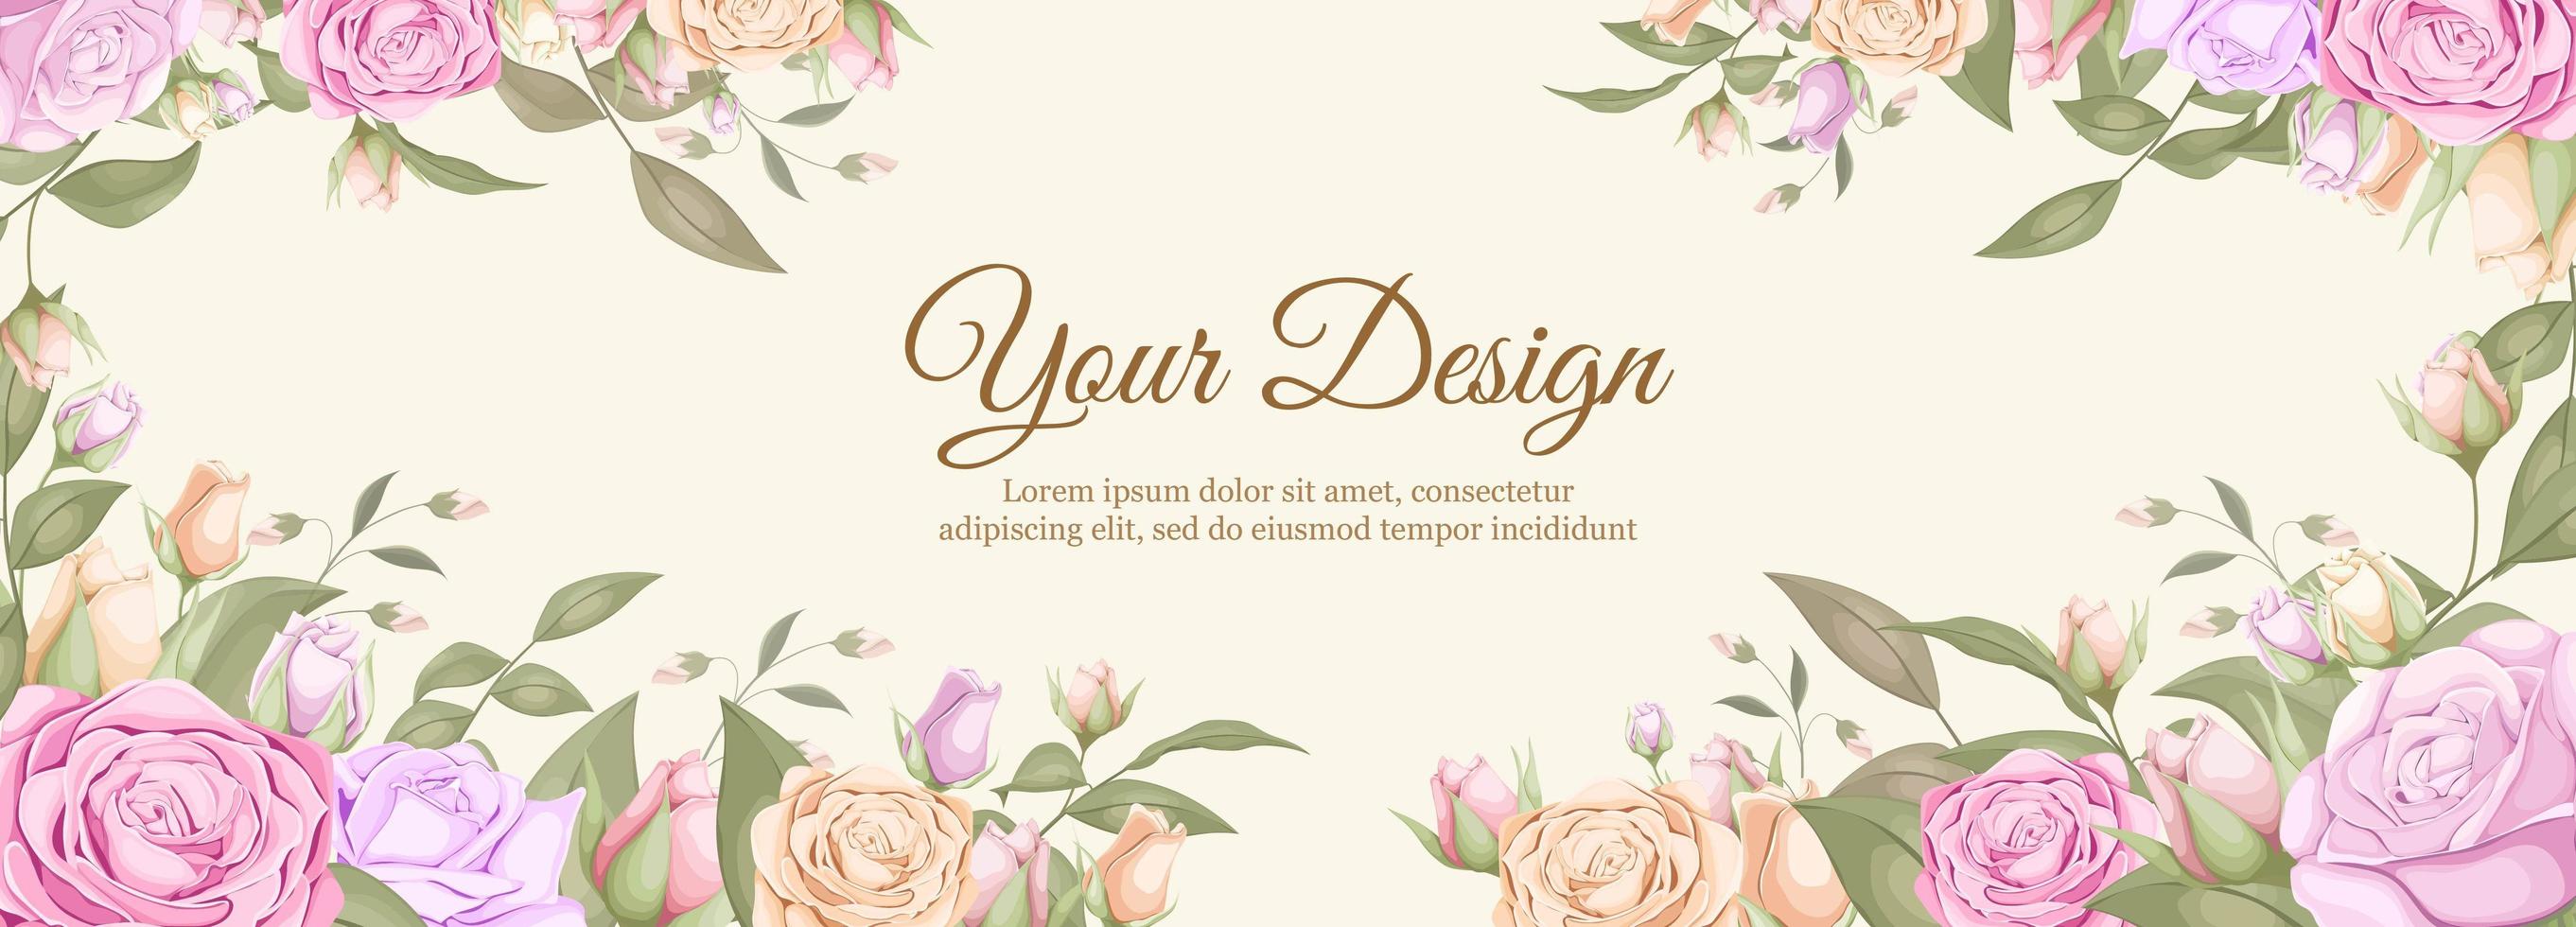 Wedding banner with watercolor rose borders vector